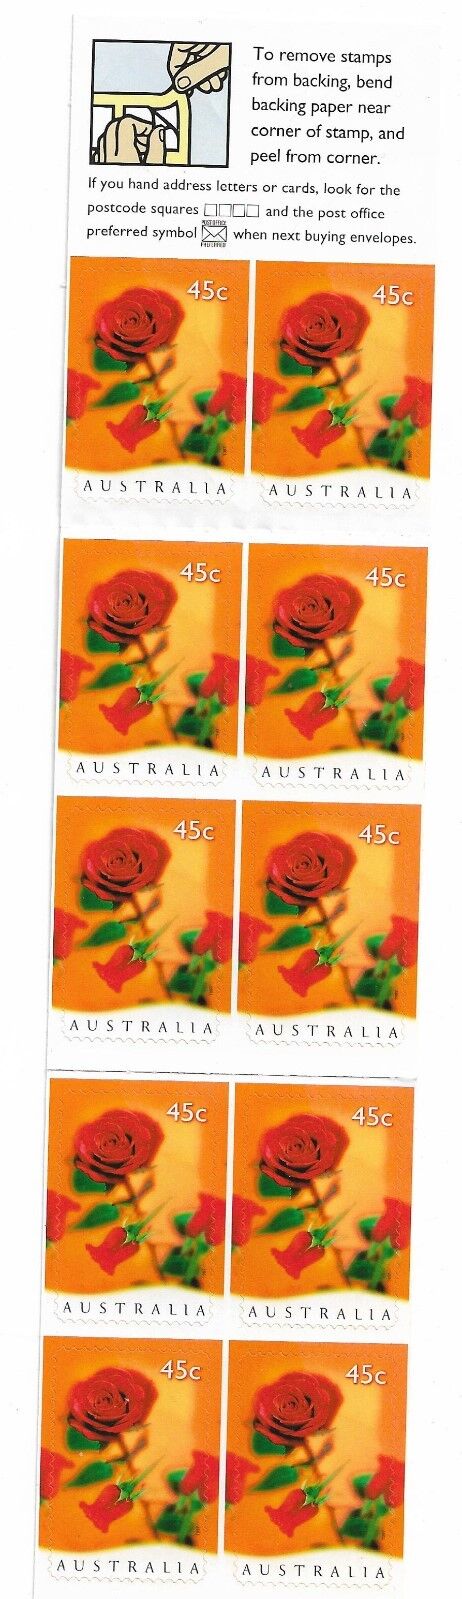 1997 $4.50 Roses Complete MUH from MNH Australia Post Sale item Omaha Mall